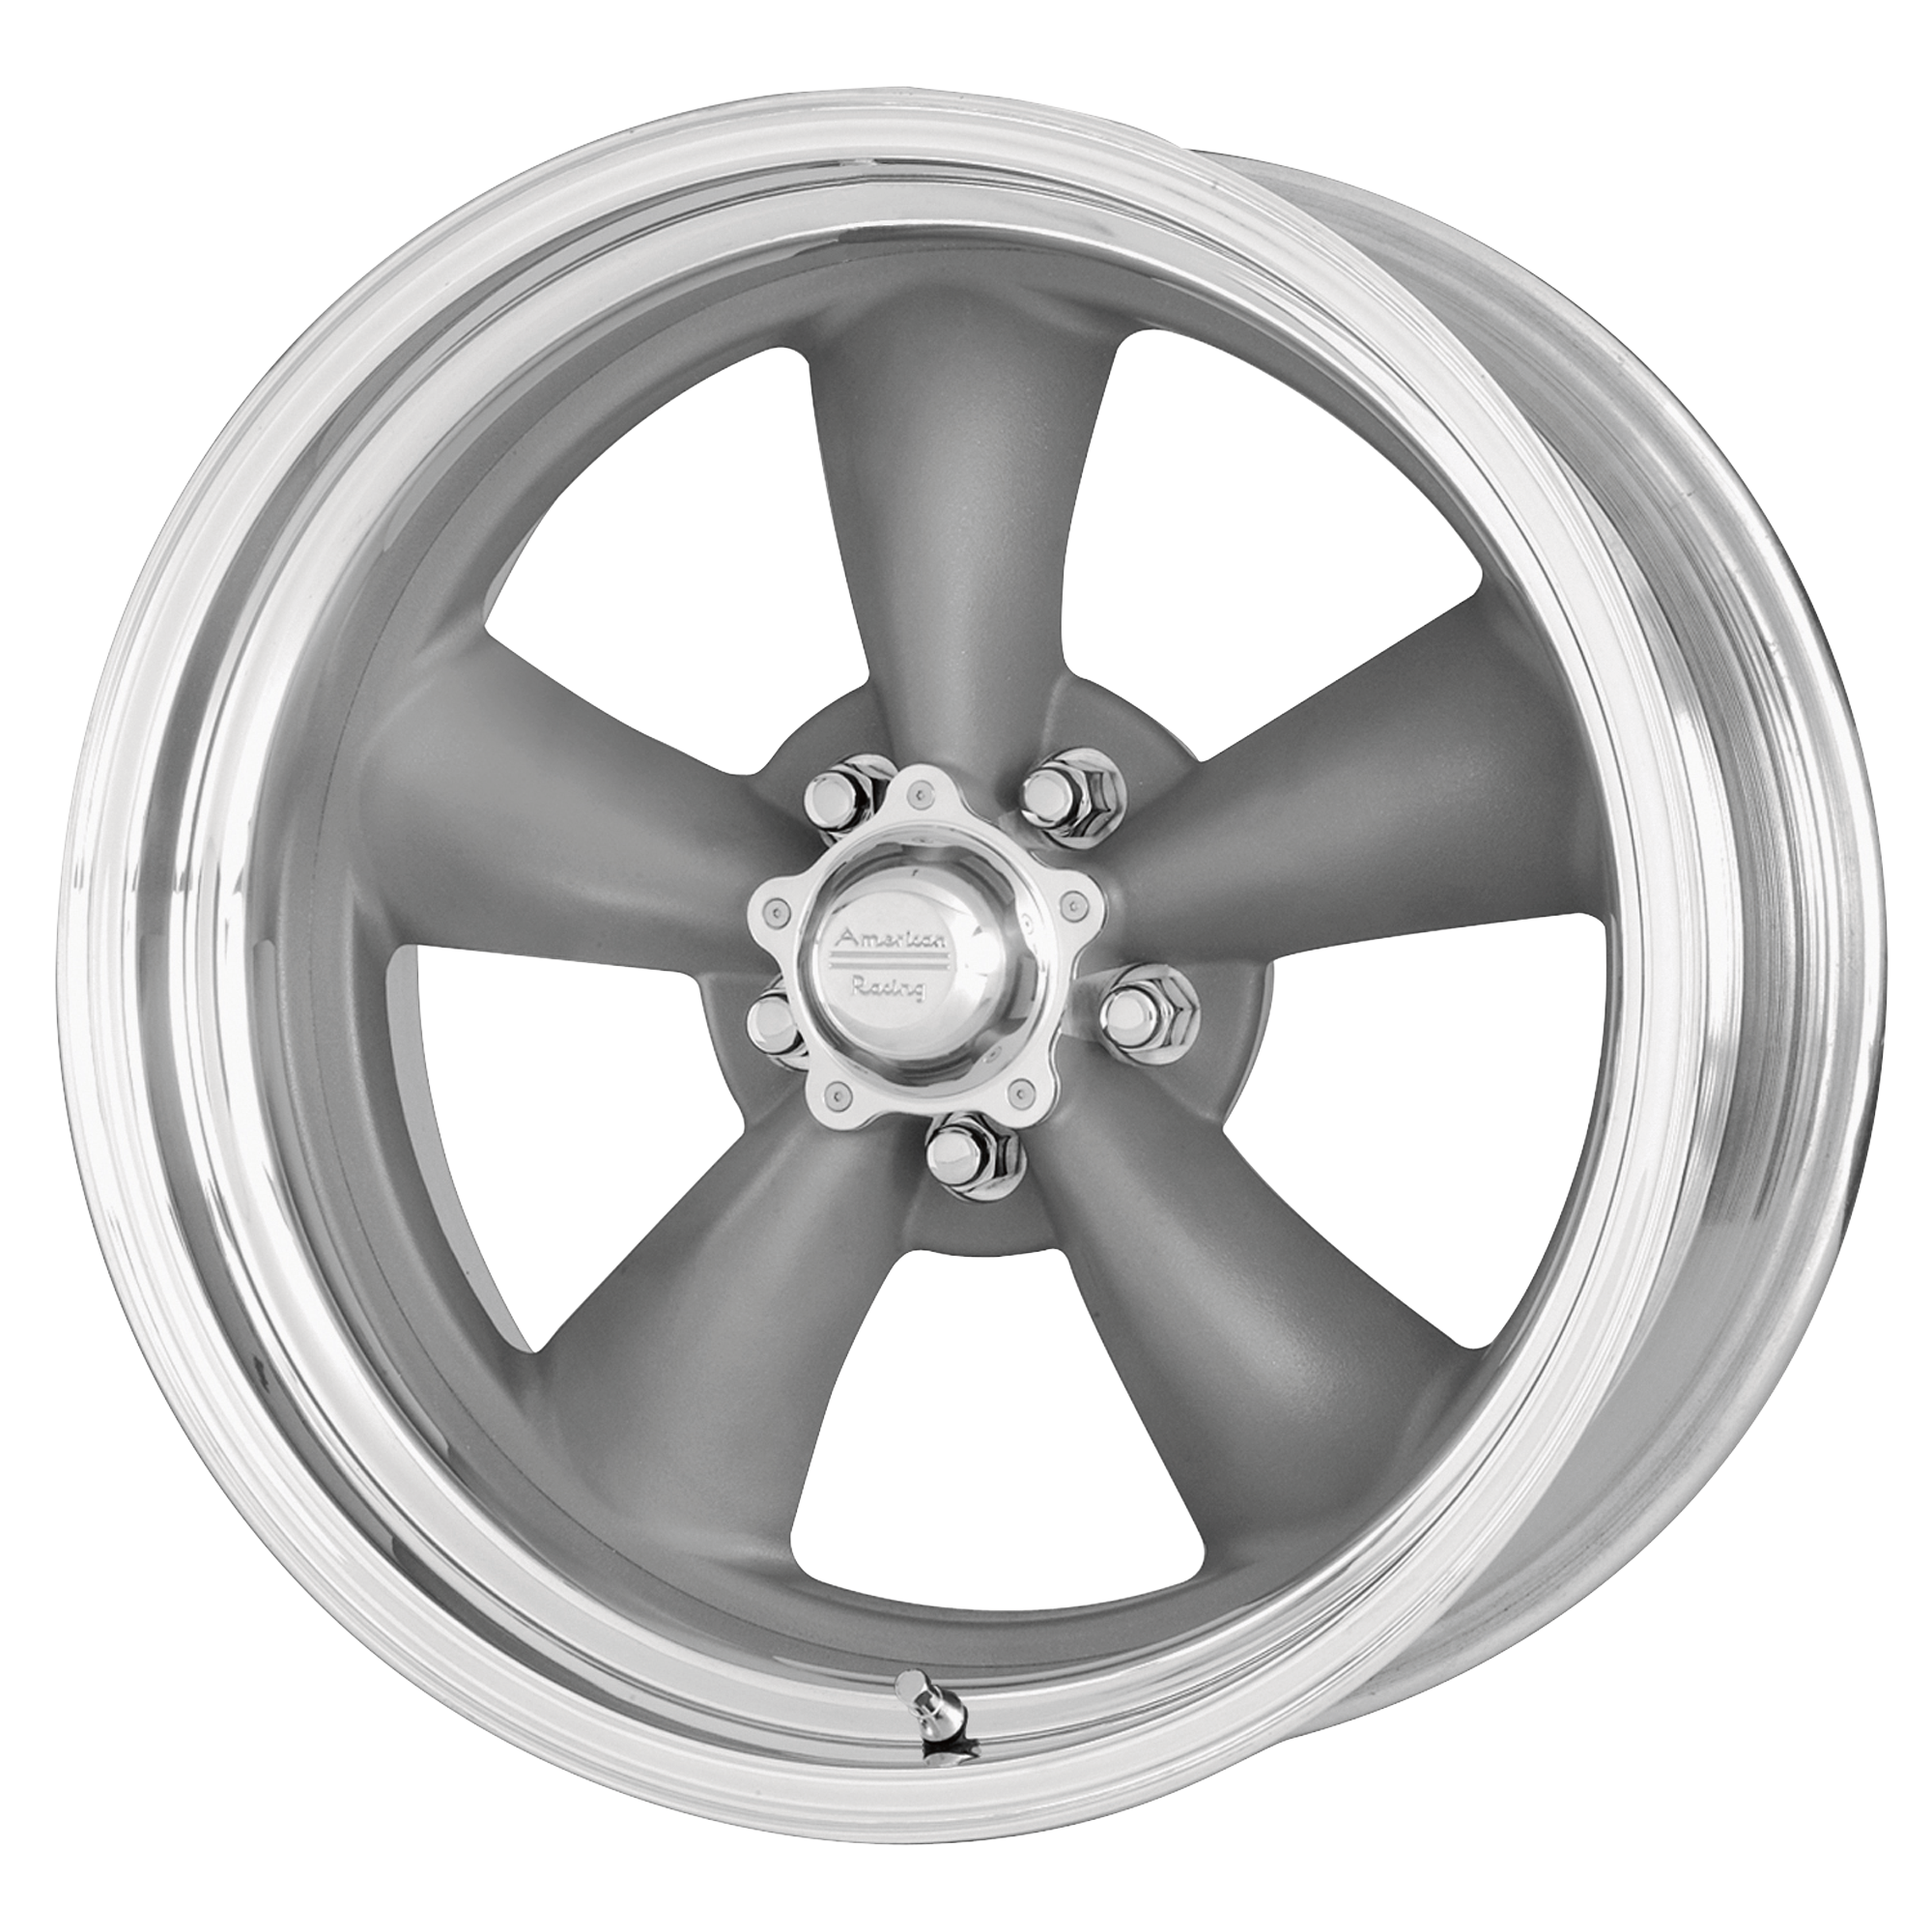 CLASSIC TORQ THRUST II ONE PIECE 17x8 5x120.65 MAG GRAY W/ MACHINED LIP (8 mm) - Tires and Engine Performance